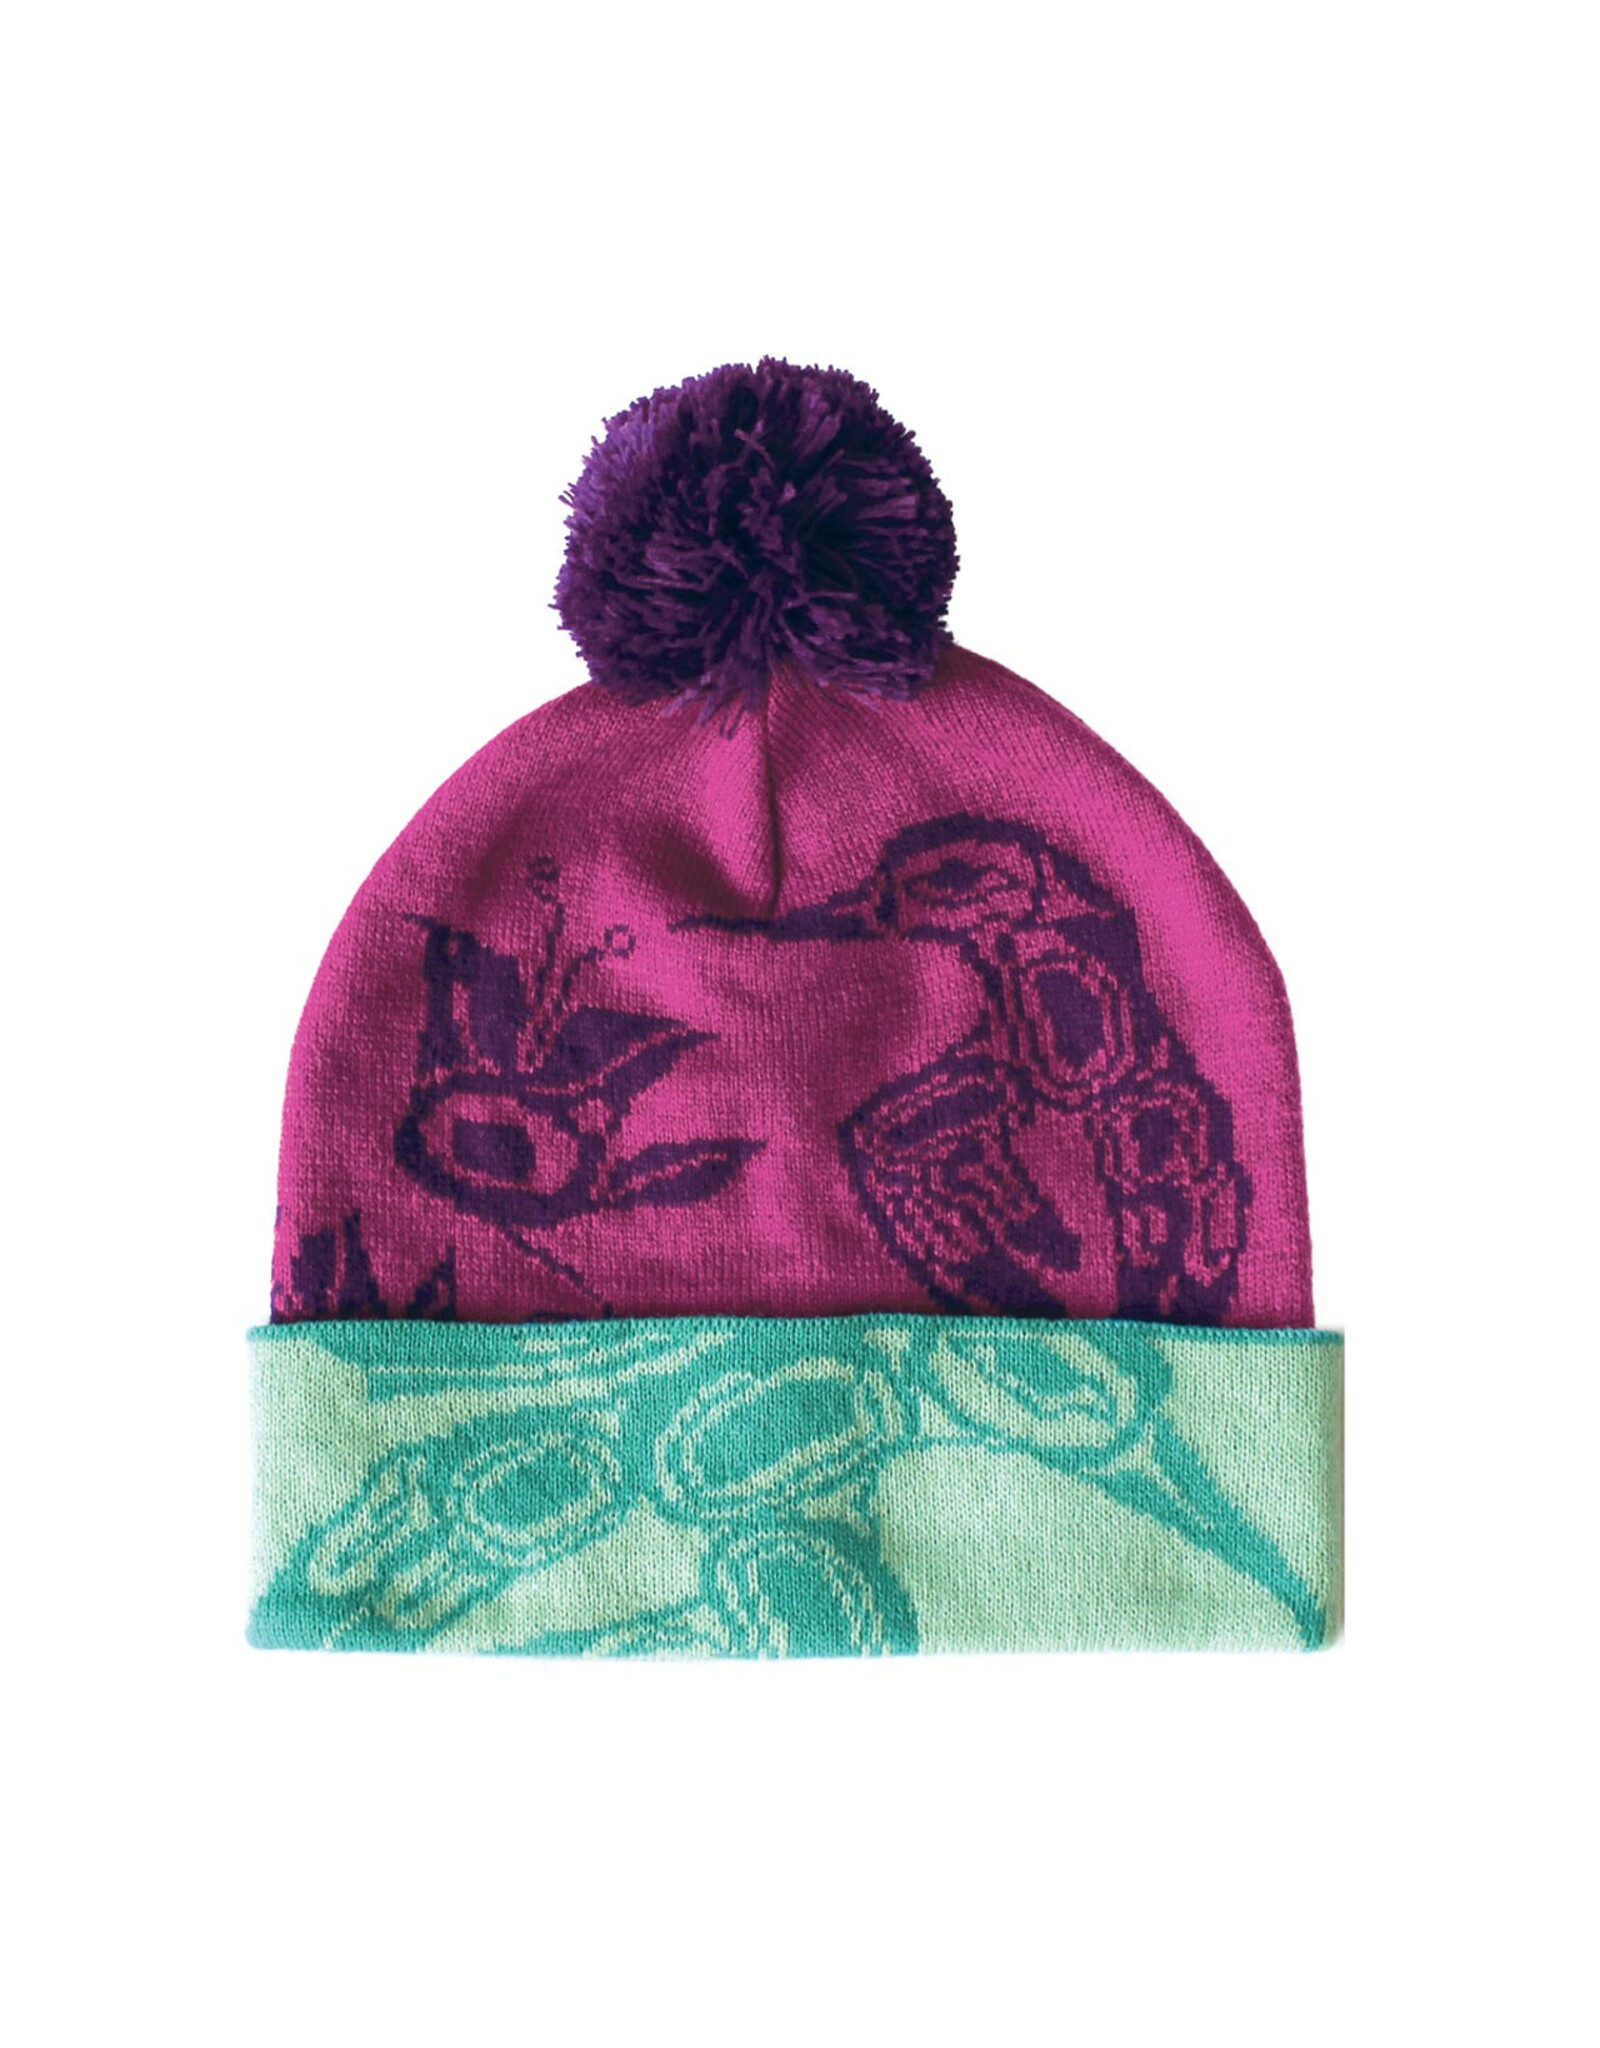 Knitted Tuque with Pom Pom - Hummingbird by Gordon White (TQGWH)